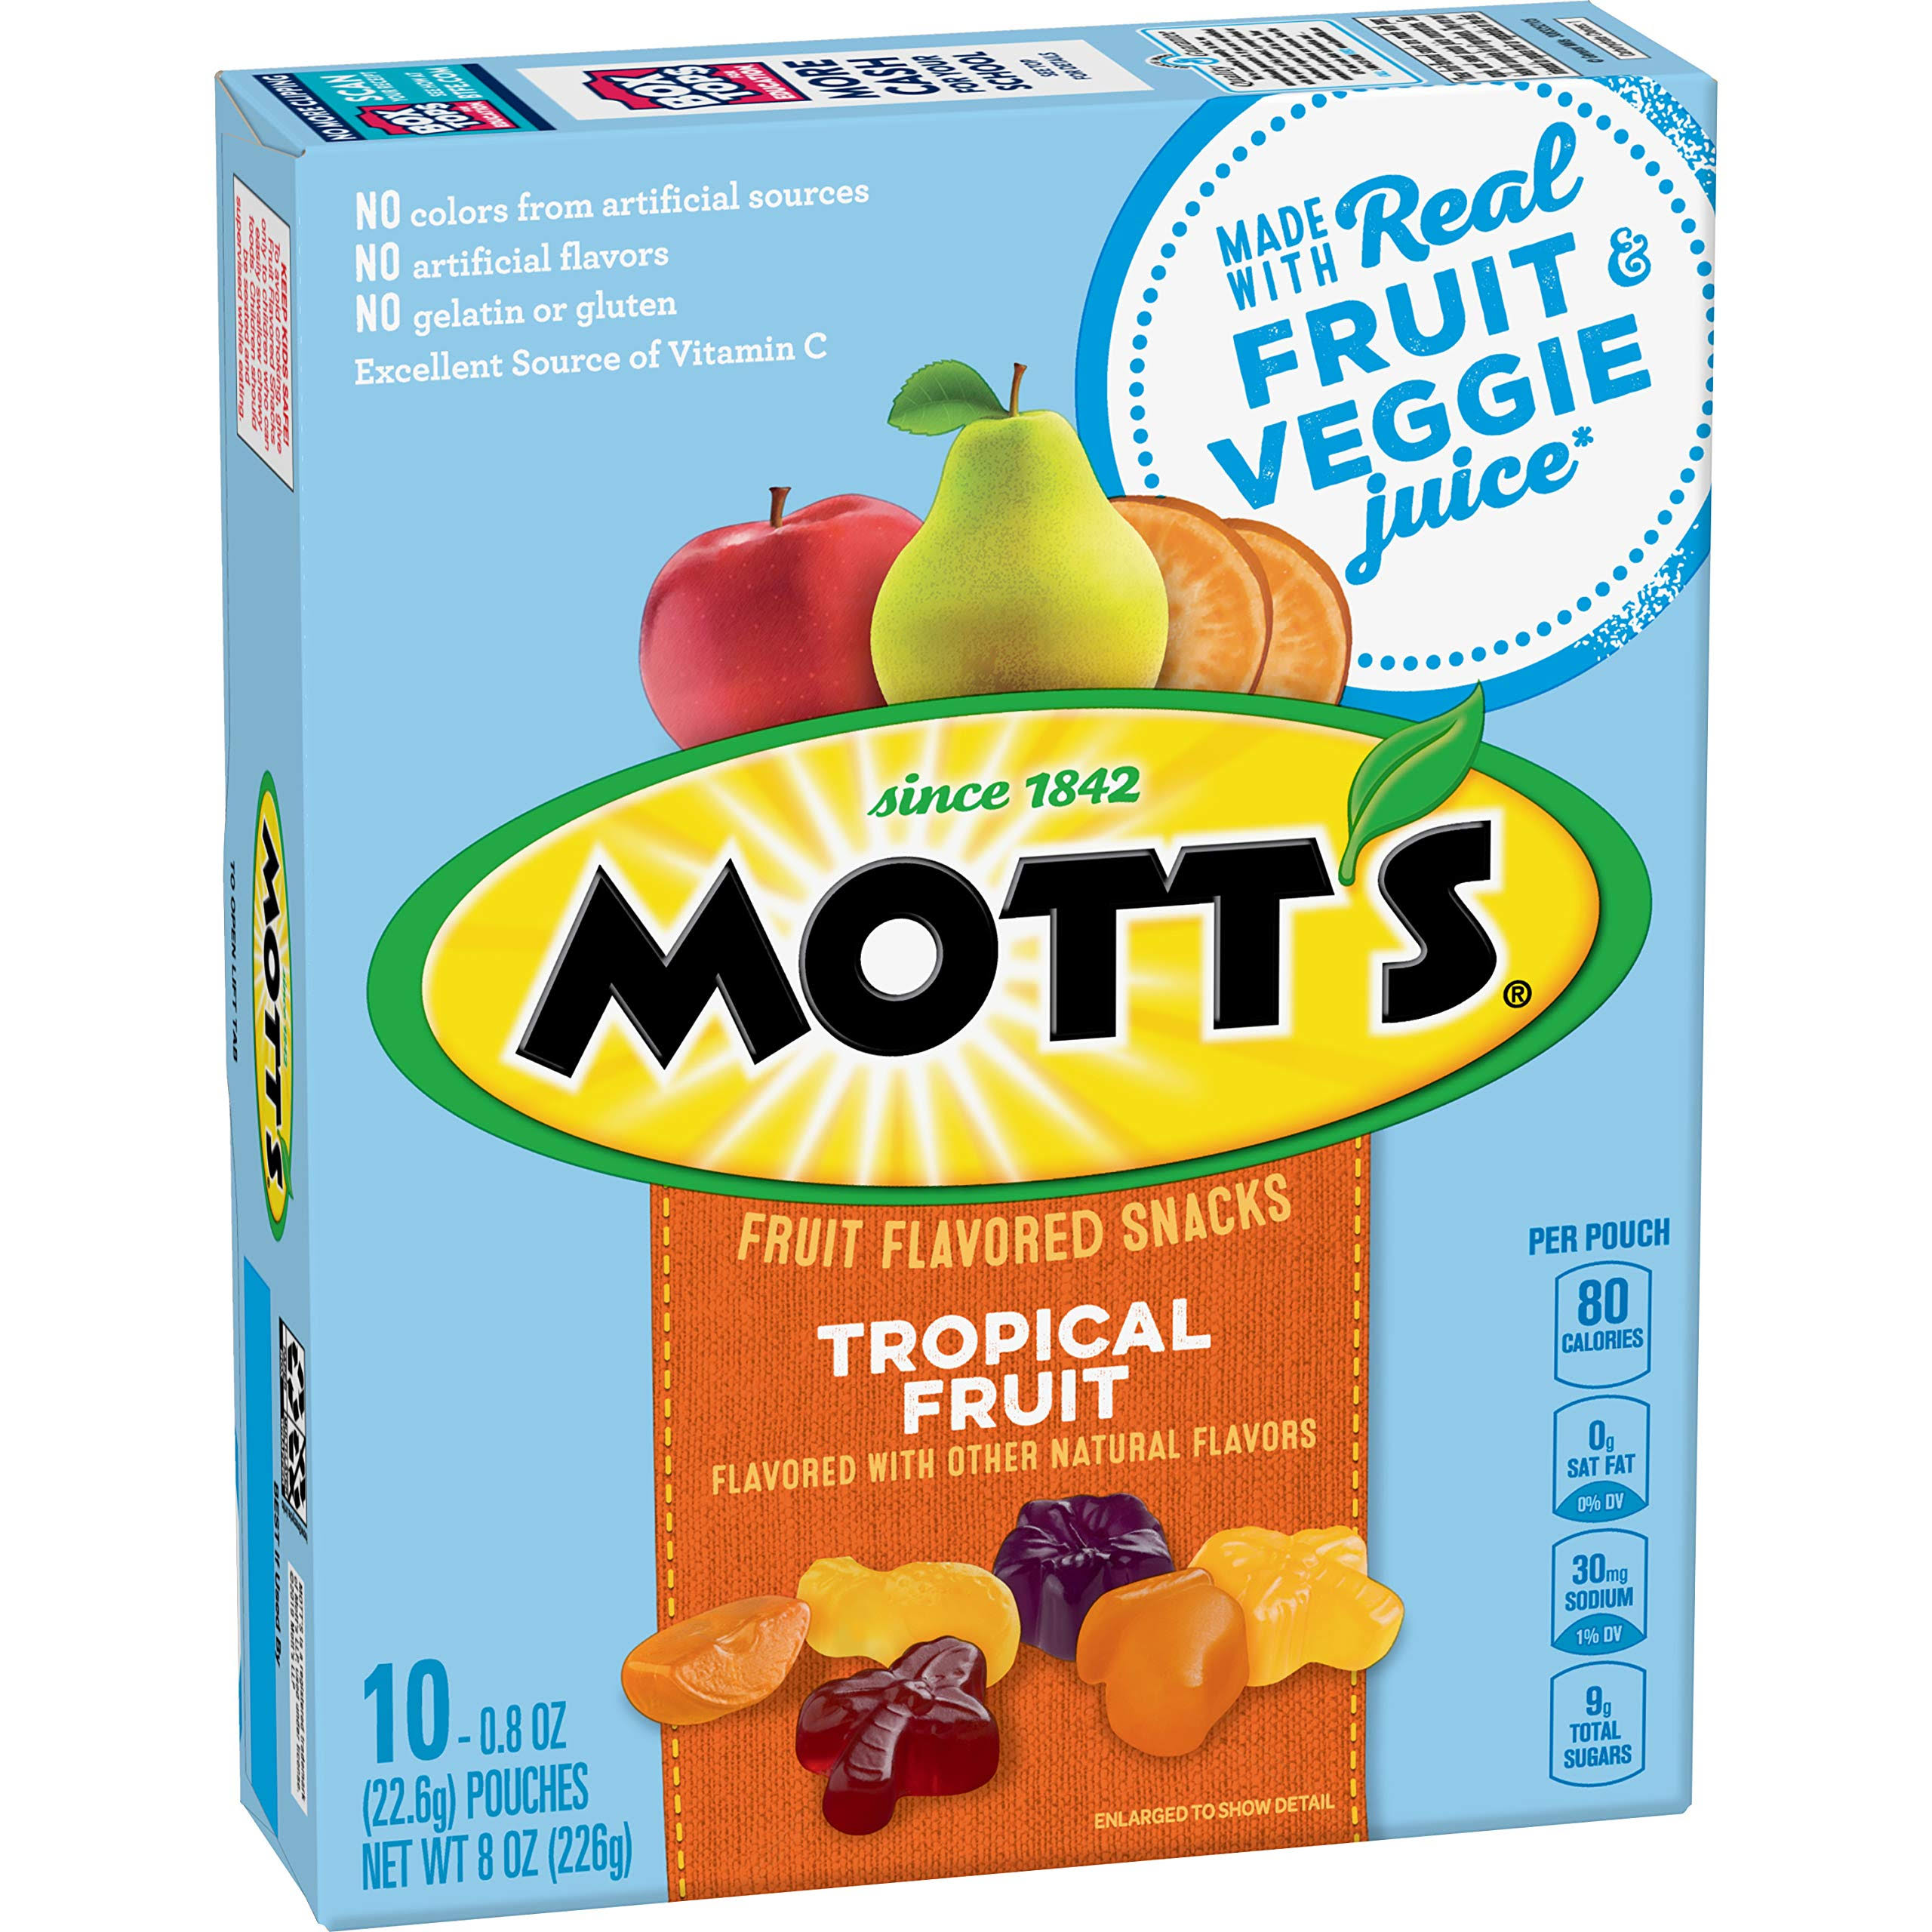 Motts Fruit Flavored Snacks, Tropical Fruit - 10 pack, 0.8 oz pouches